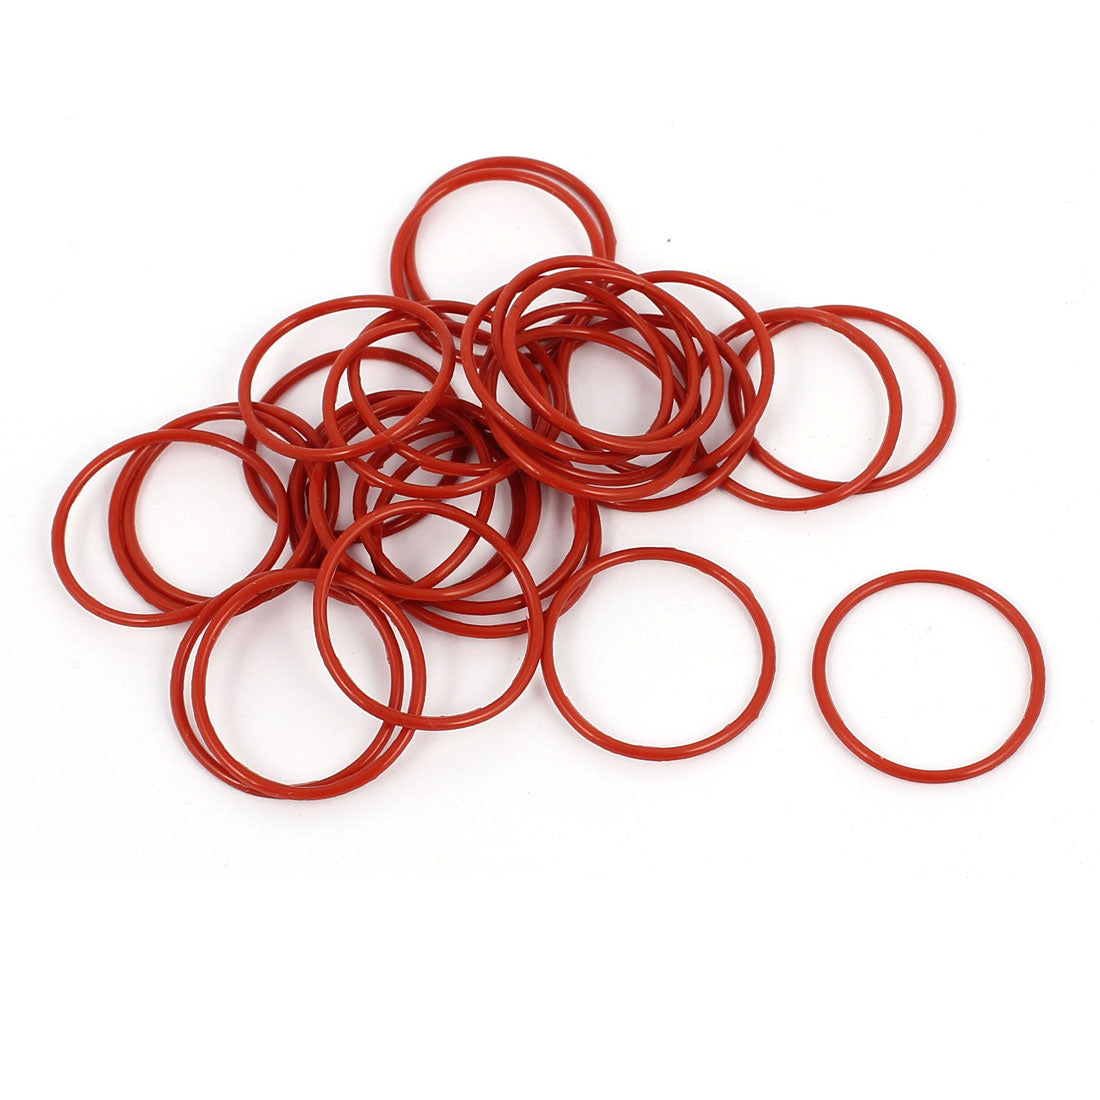 uxcell Uxcell 30Pcs 18mm x 1mm Rubber O-rings NBR Heat Resistant Sealing Ring Grommets Red